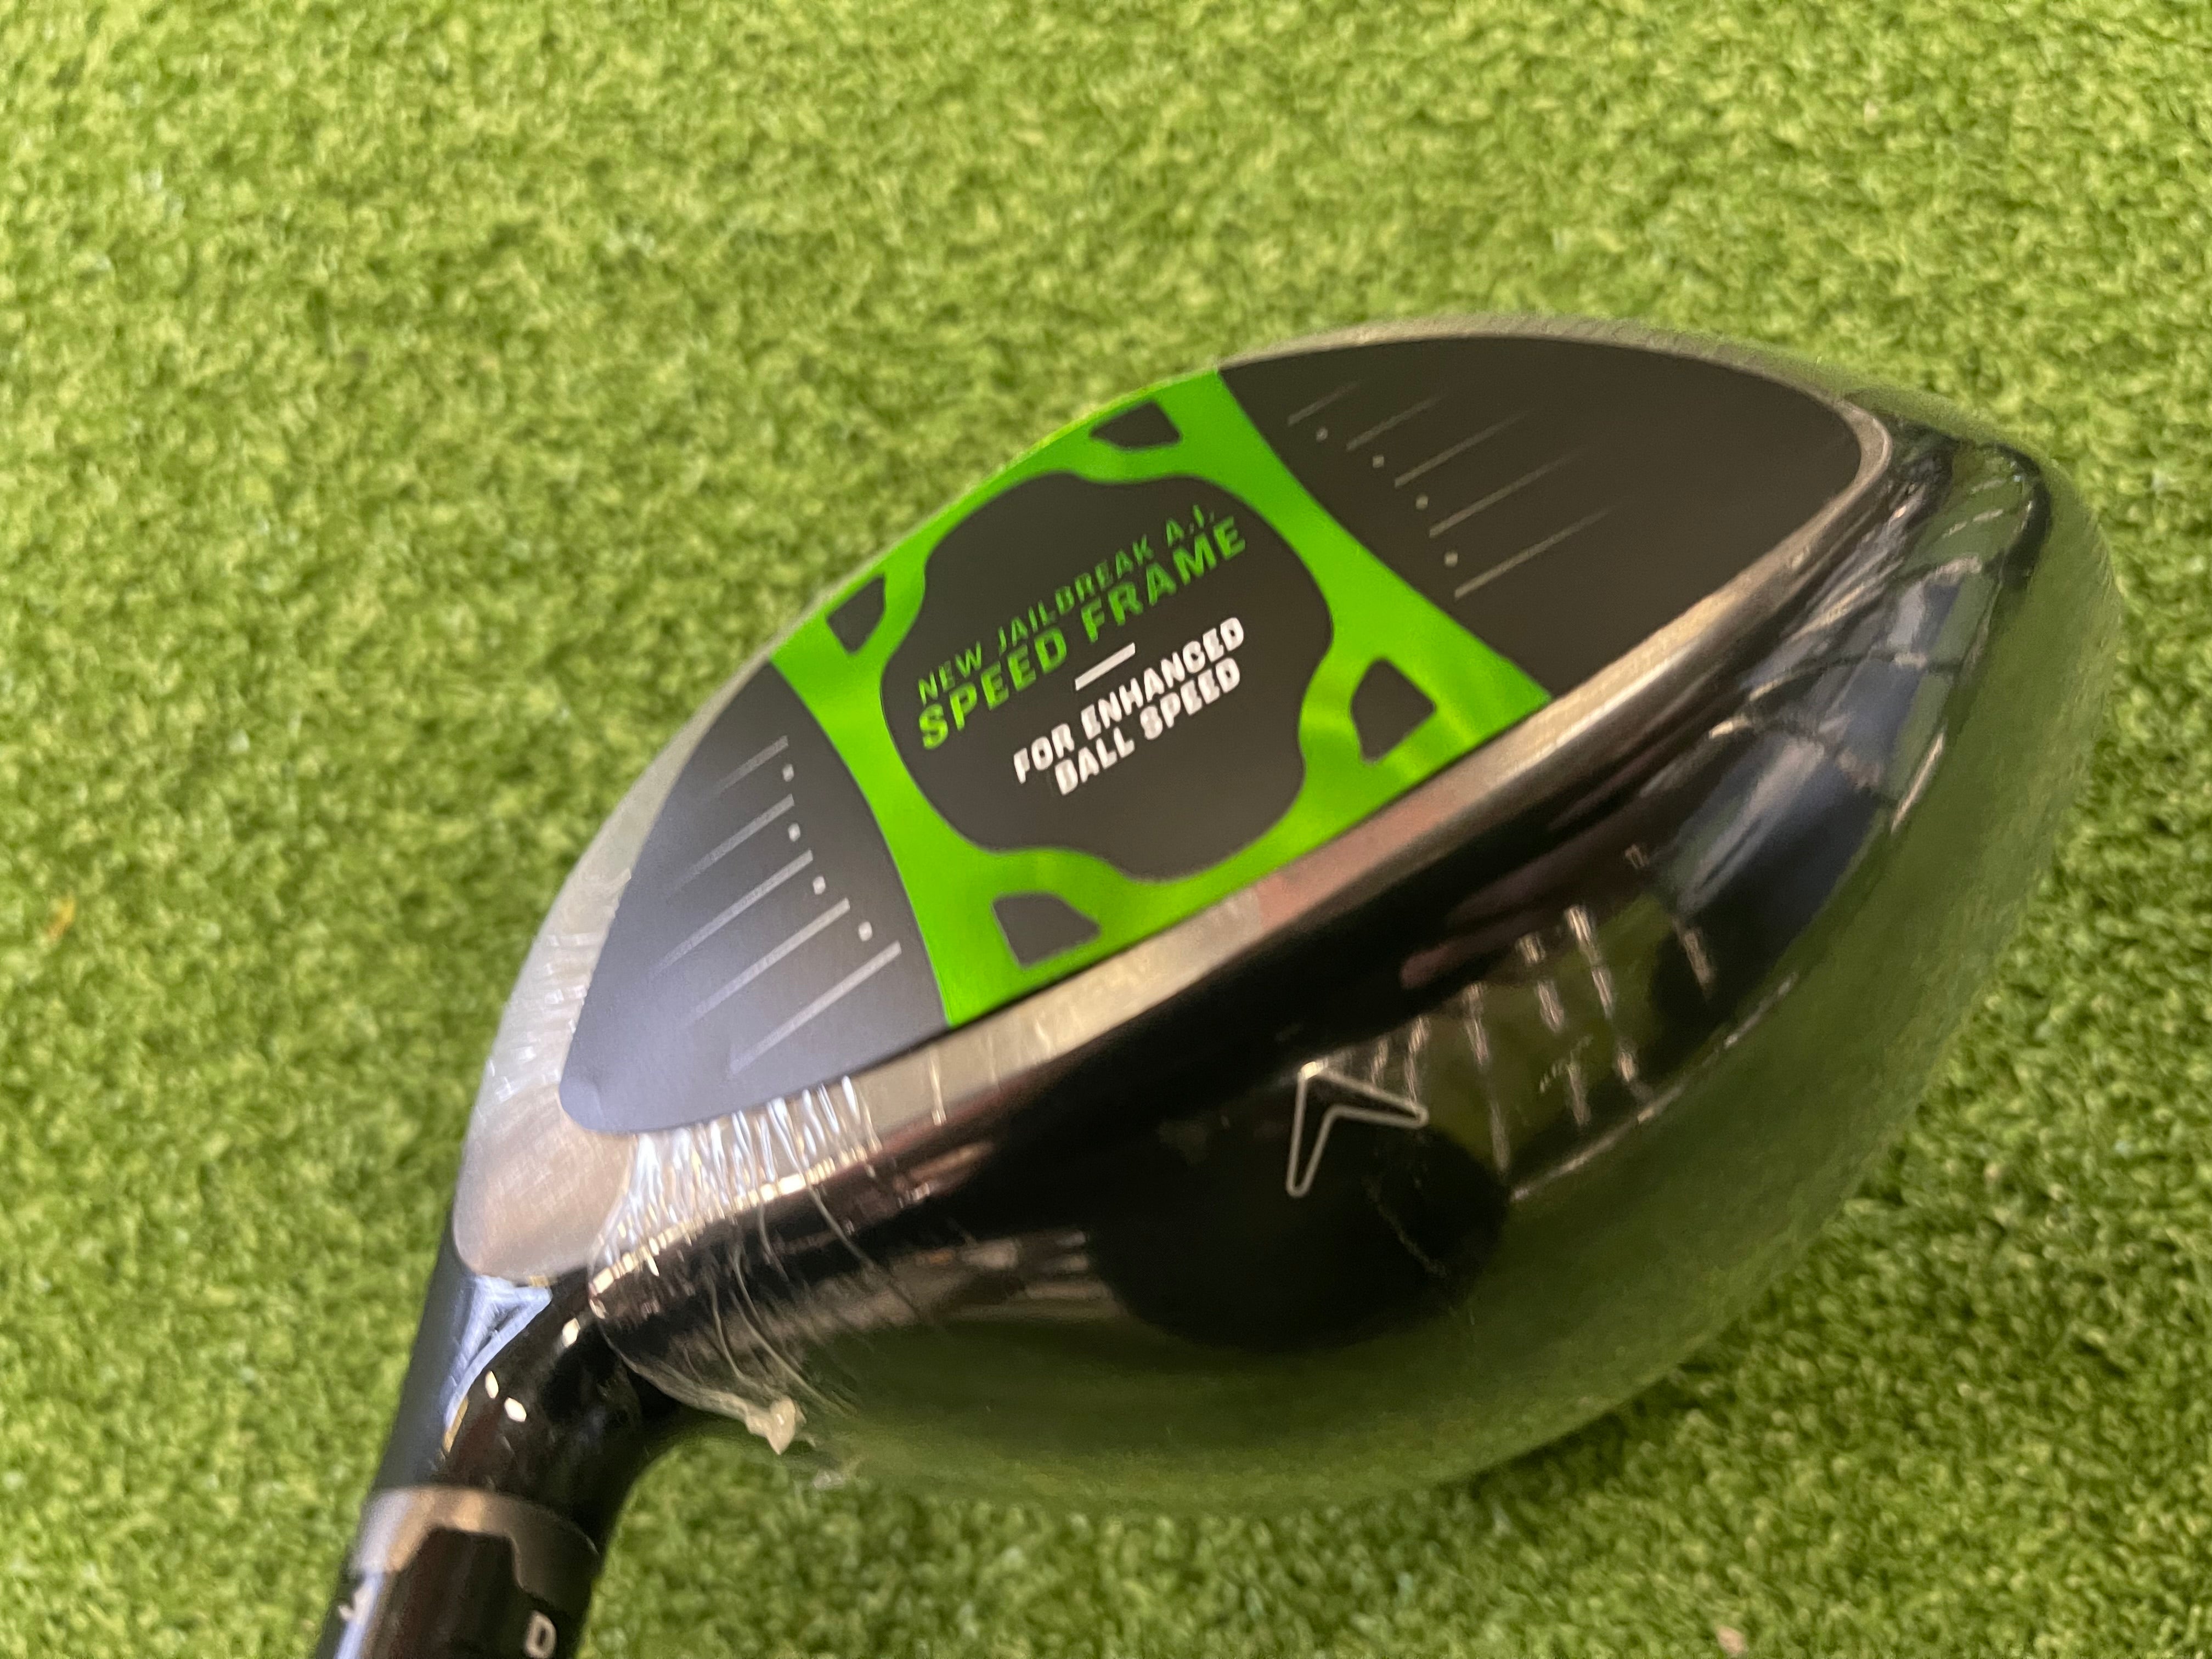 *New* 2021 Epic Max 9° Driver With Headcover